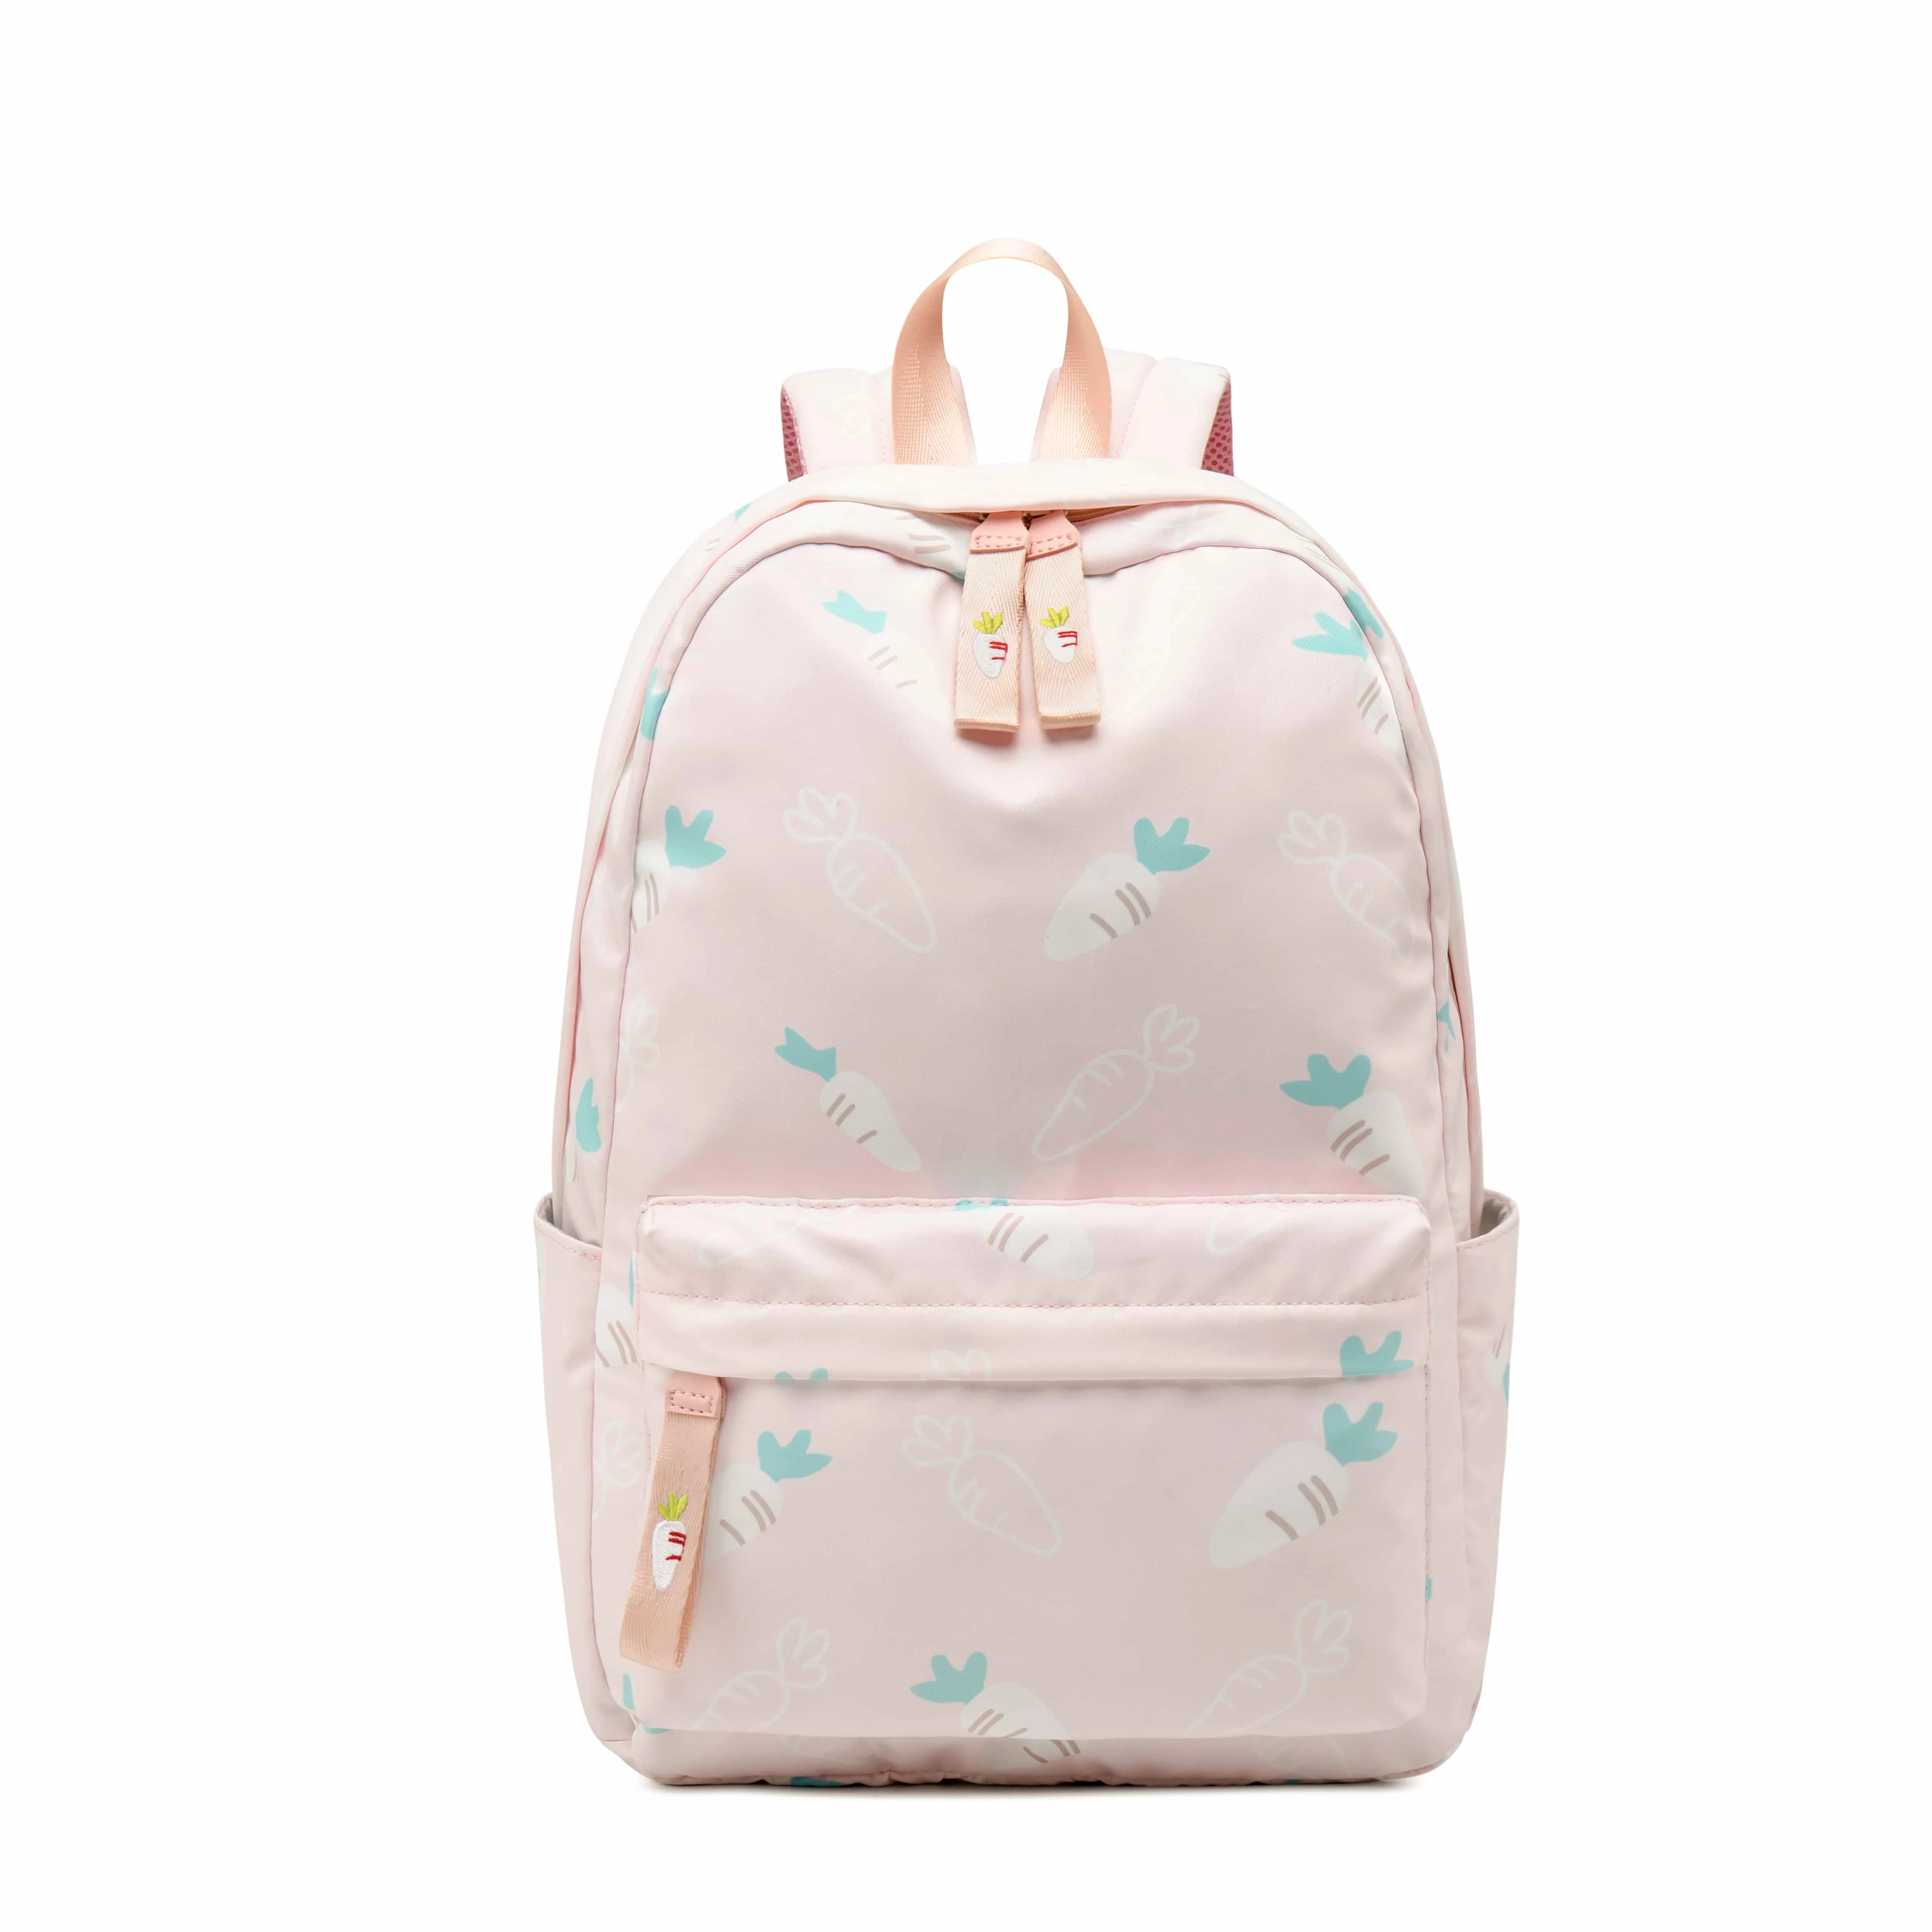 

Recommend Large capacity shoulder bag female small Cartoon radish student schoolbag campus backpack, Gradient colours